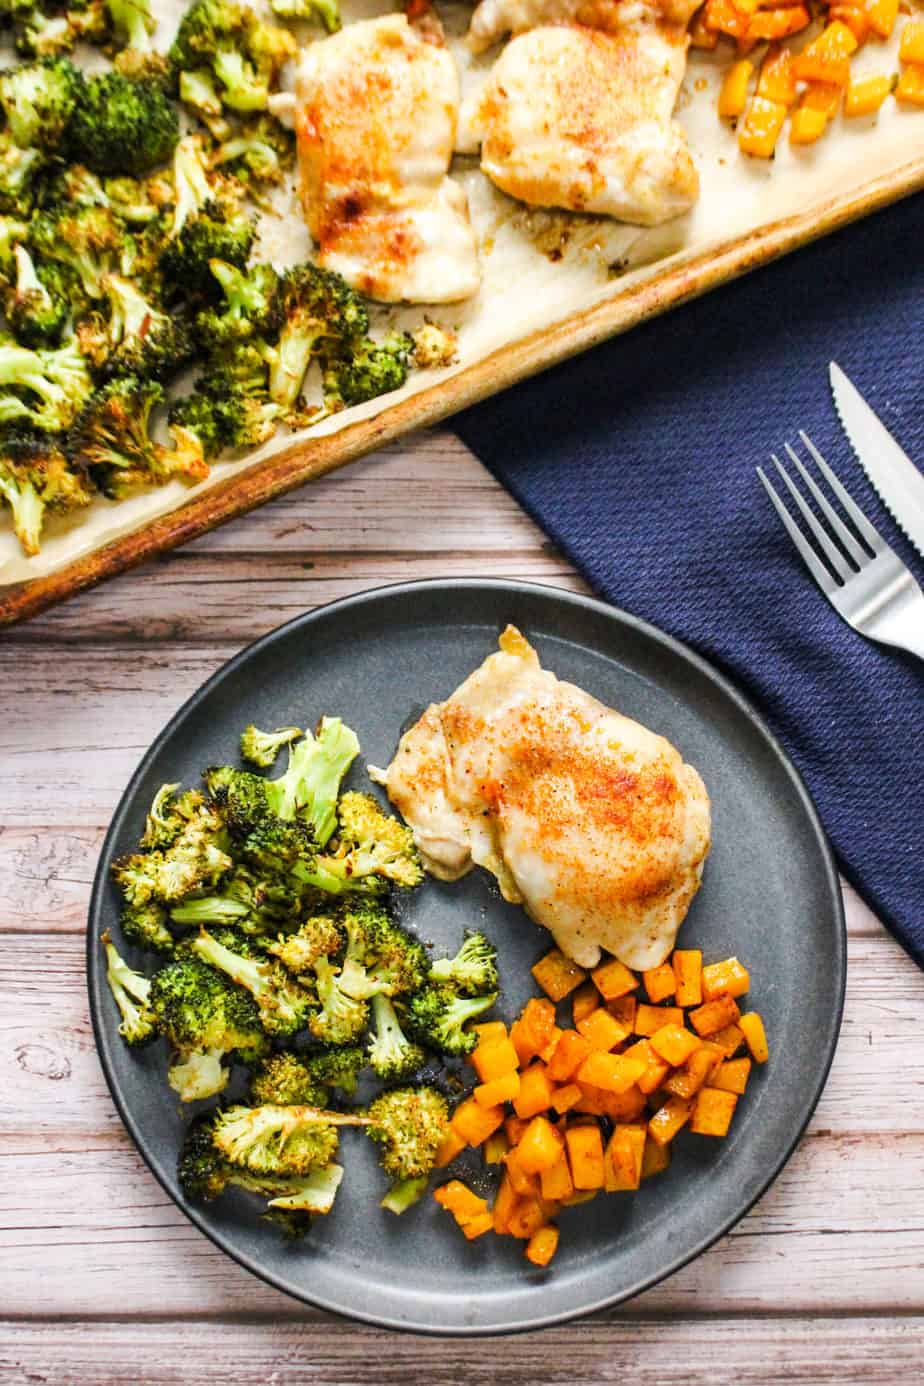 Juicy sheet pan chicken thigh on a plate beside roasted broccoli and butternut squash